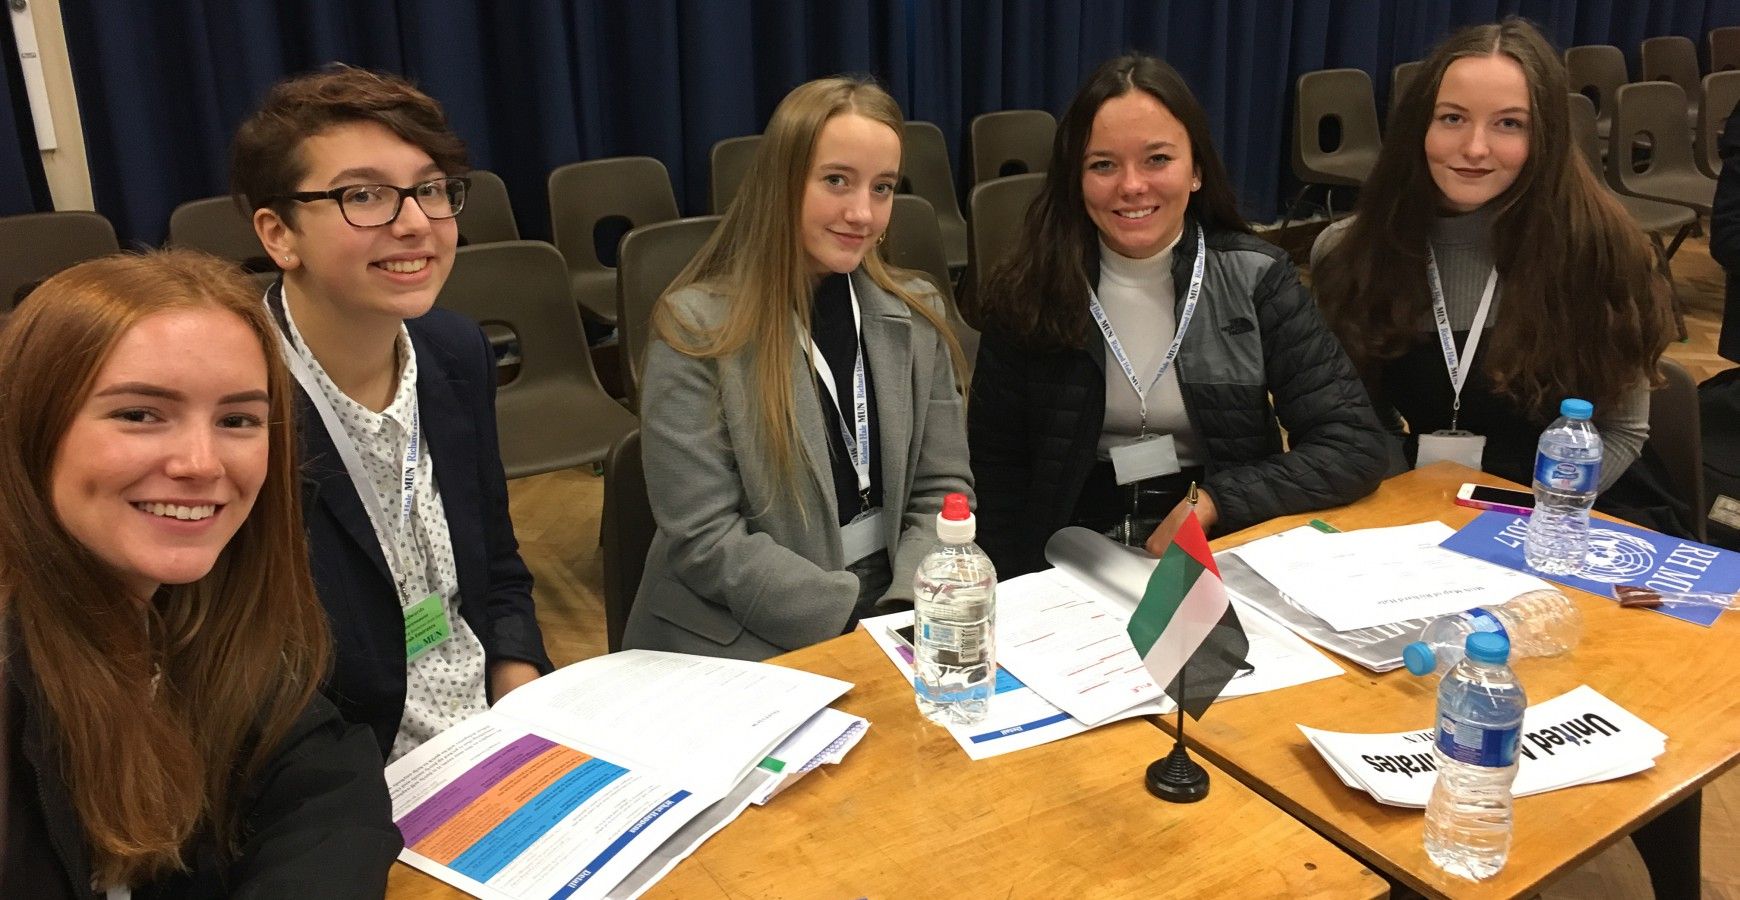 Notley High School & Braintree Sixth Form students at Model United Nations